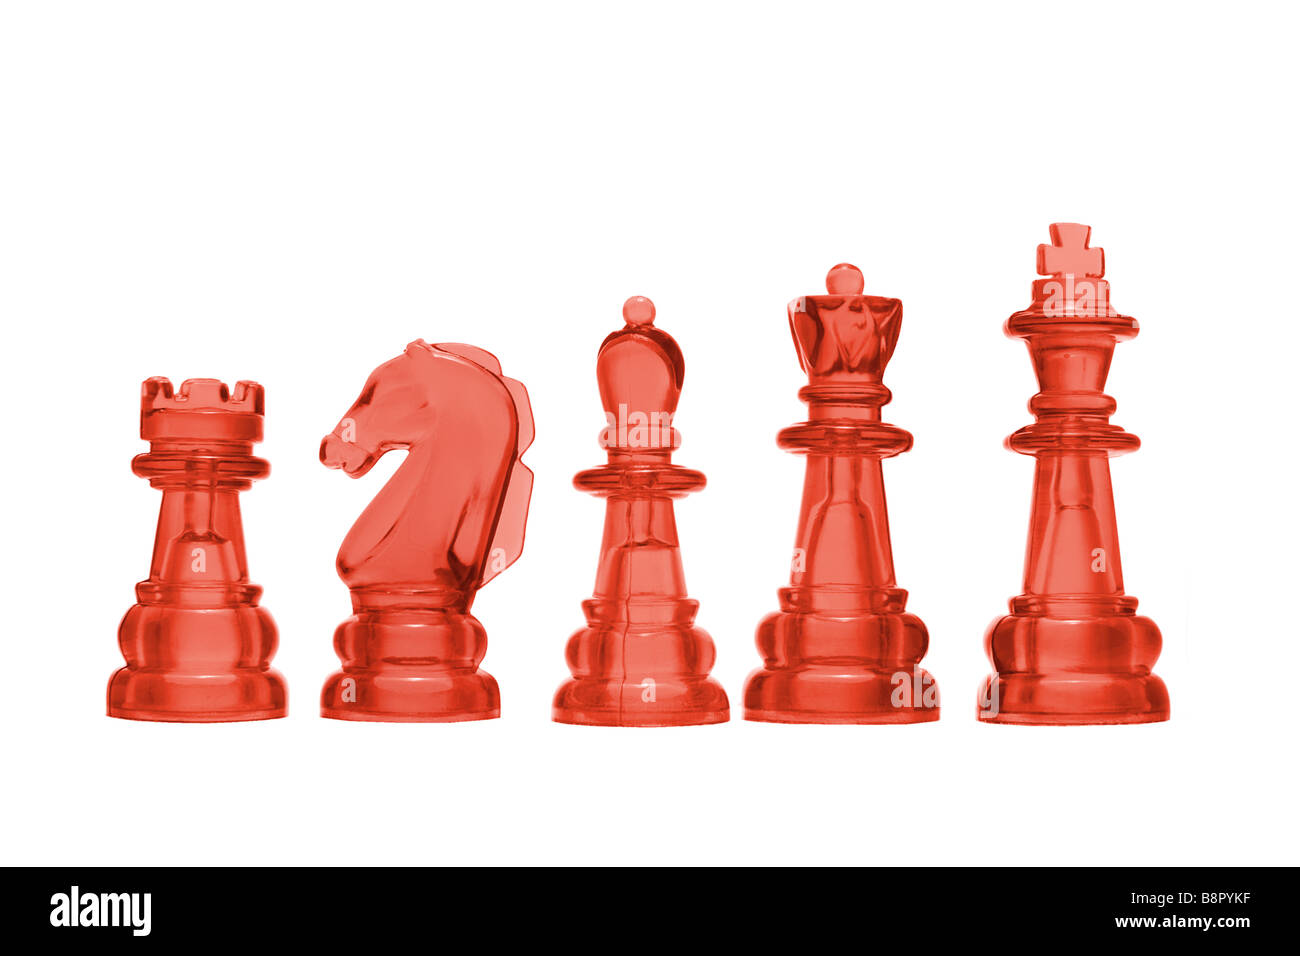 Row of Chess Pieces Stock Photo